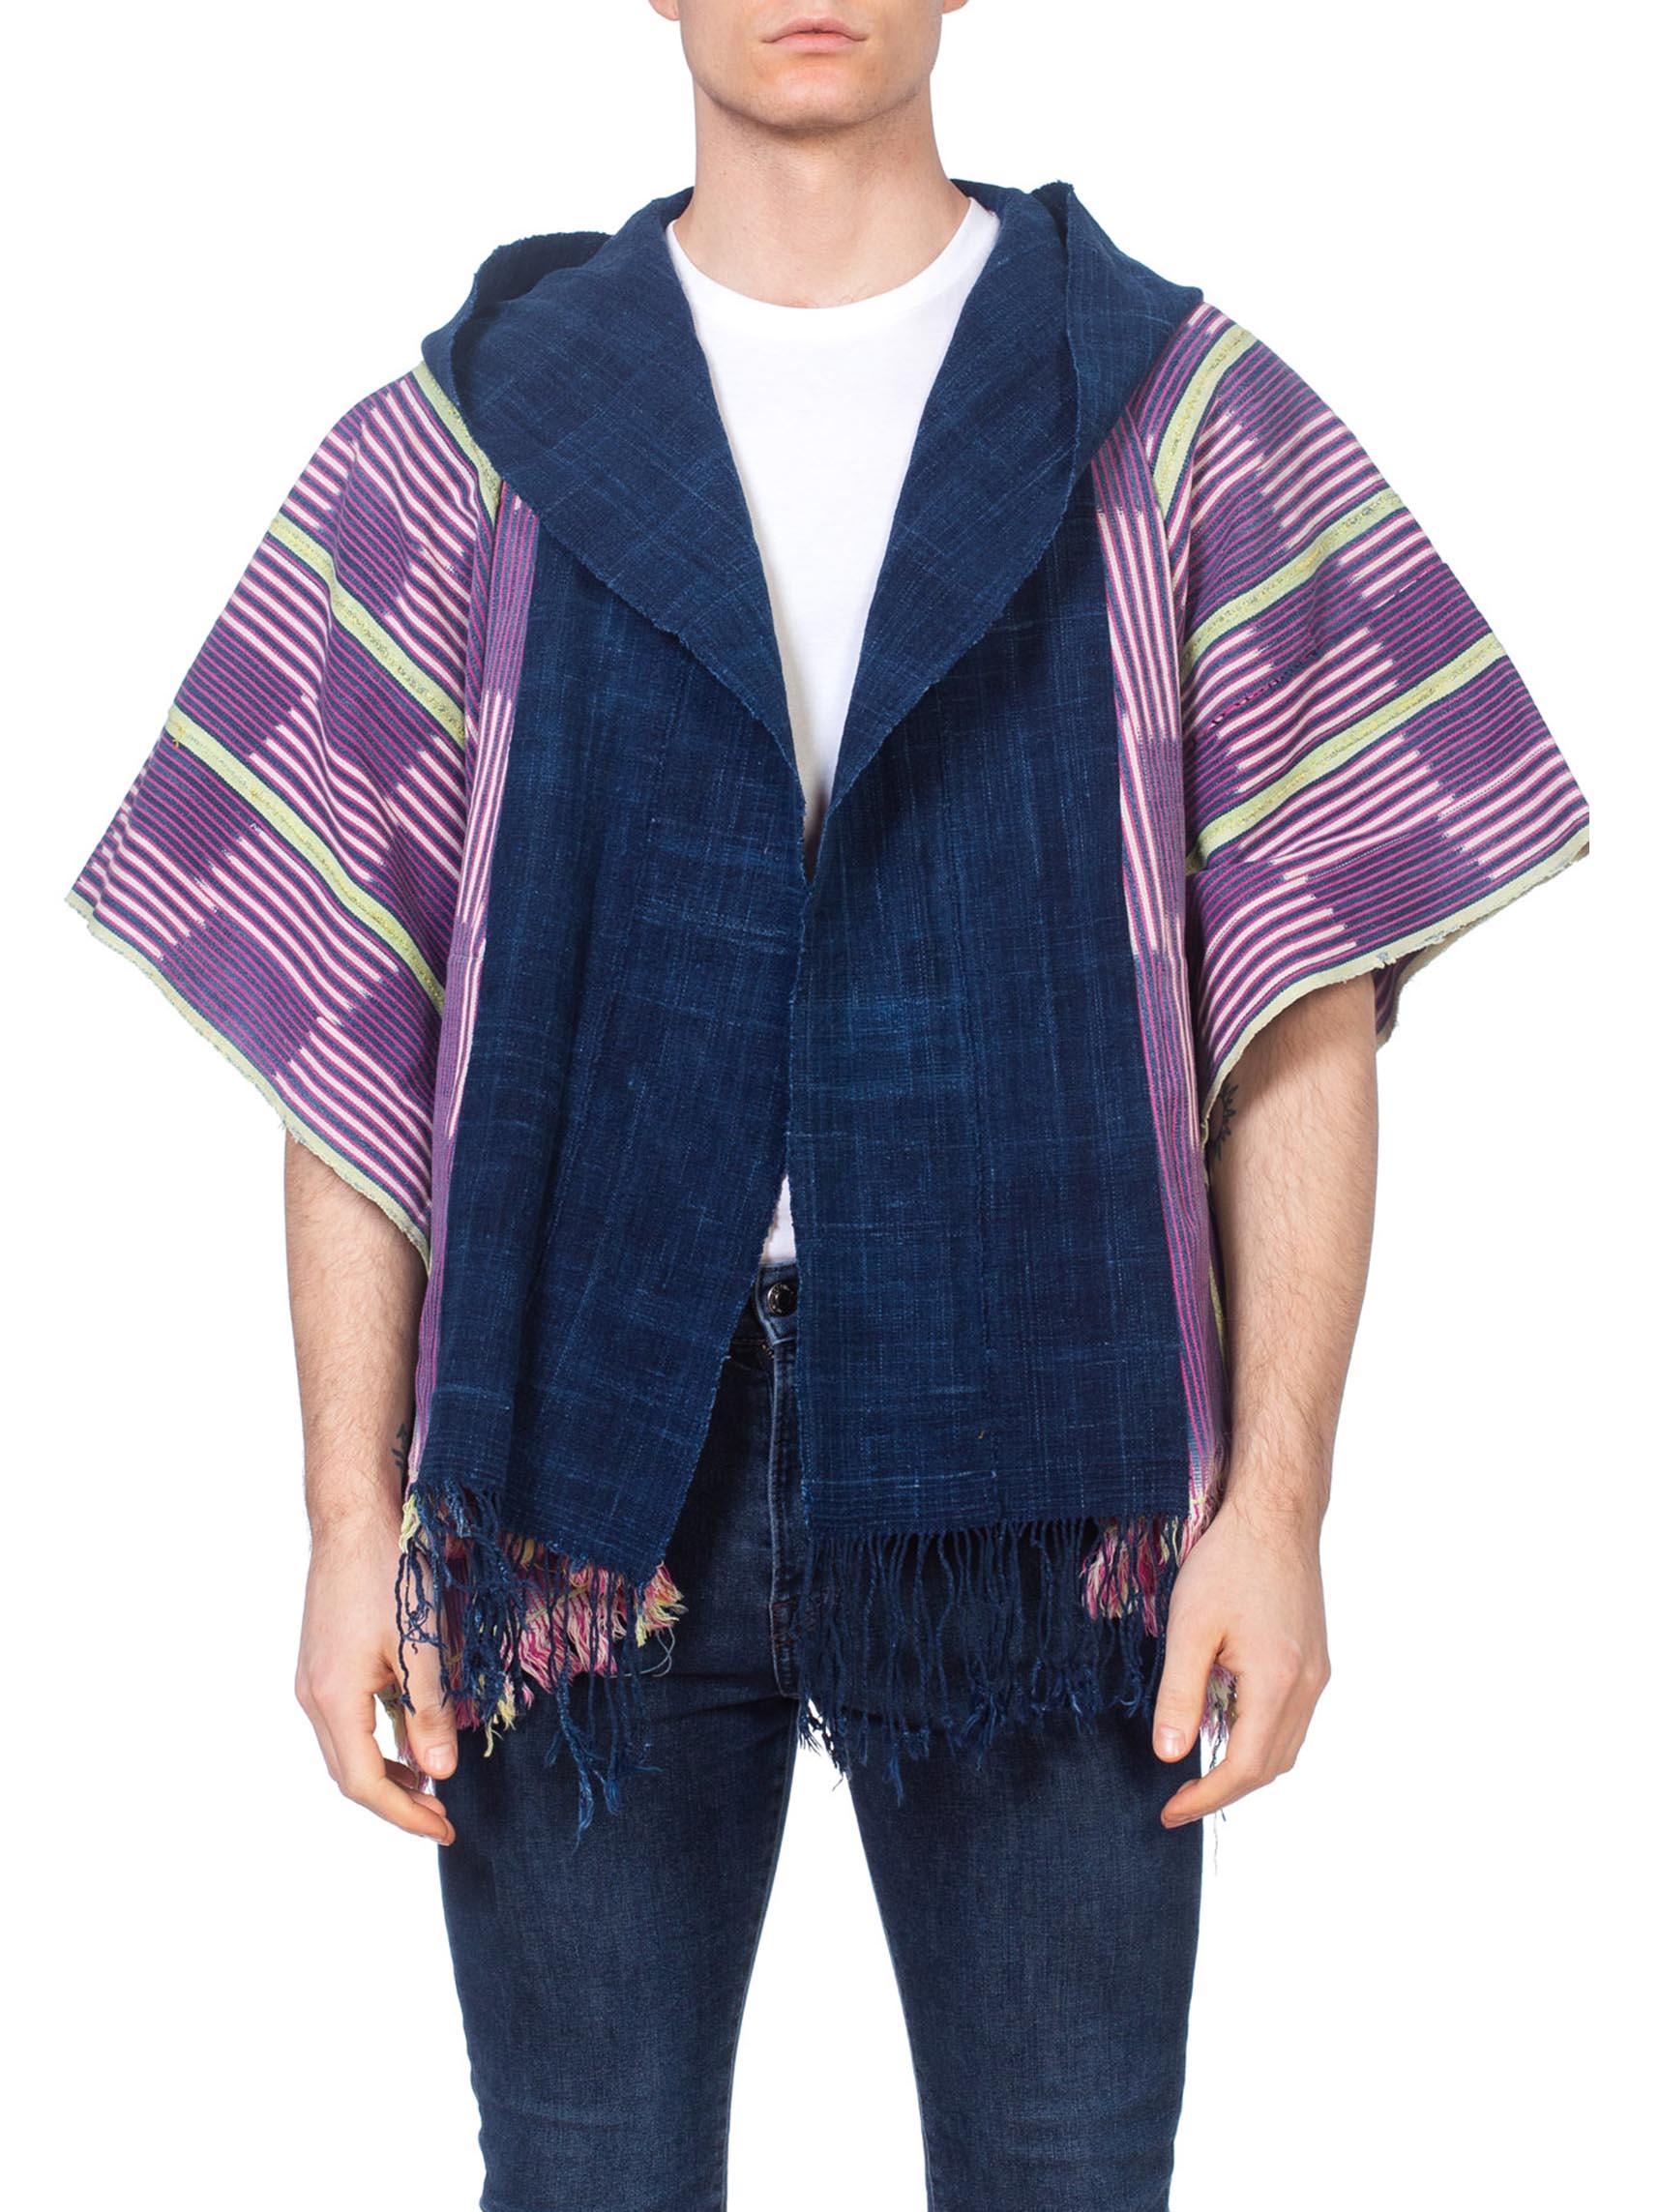 MORPHEW COLLECTION Pink & Blue Indigo Cotton African Blanket Hooded Poncho
MORPHEW COLLECTION is made entirely by hand in our NYC Ateliér of rare antique materials sourced from around the globe. Our sustainable vintage materials represent over a